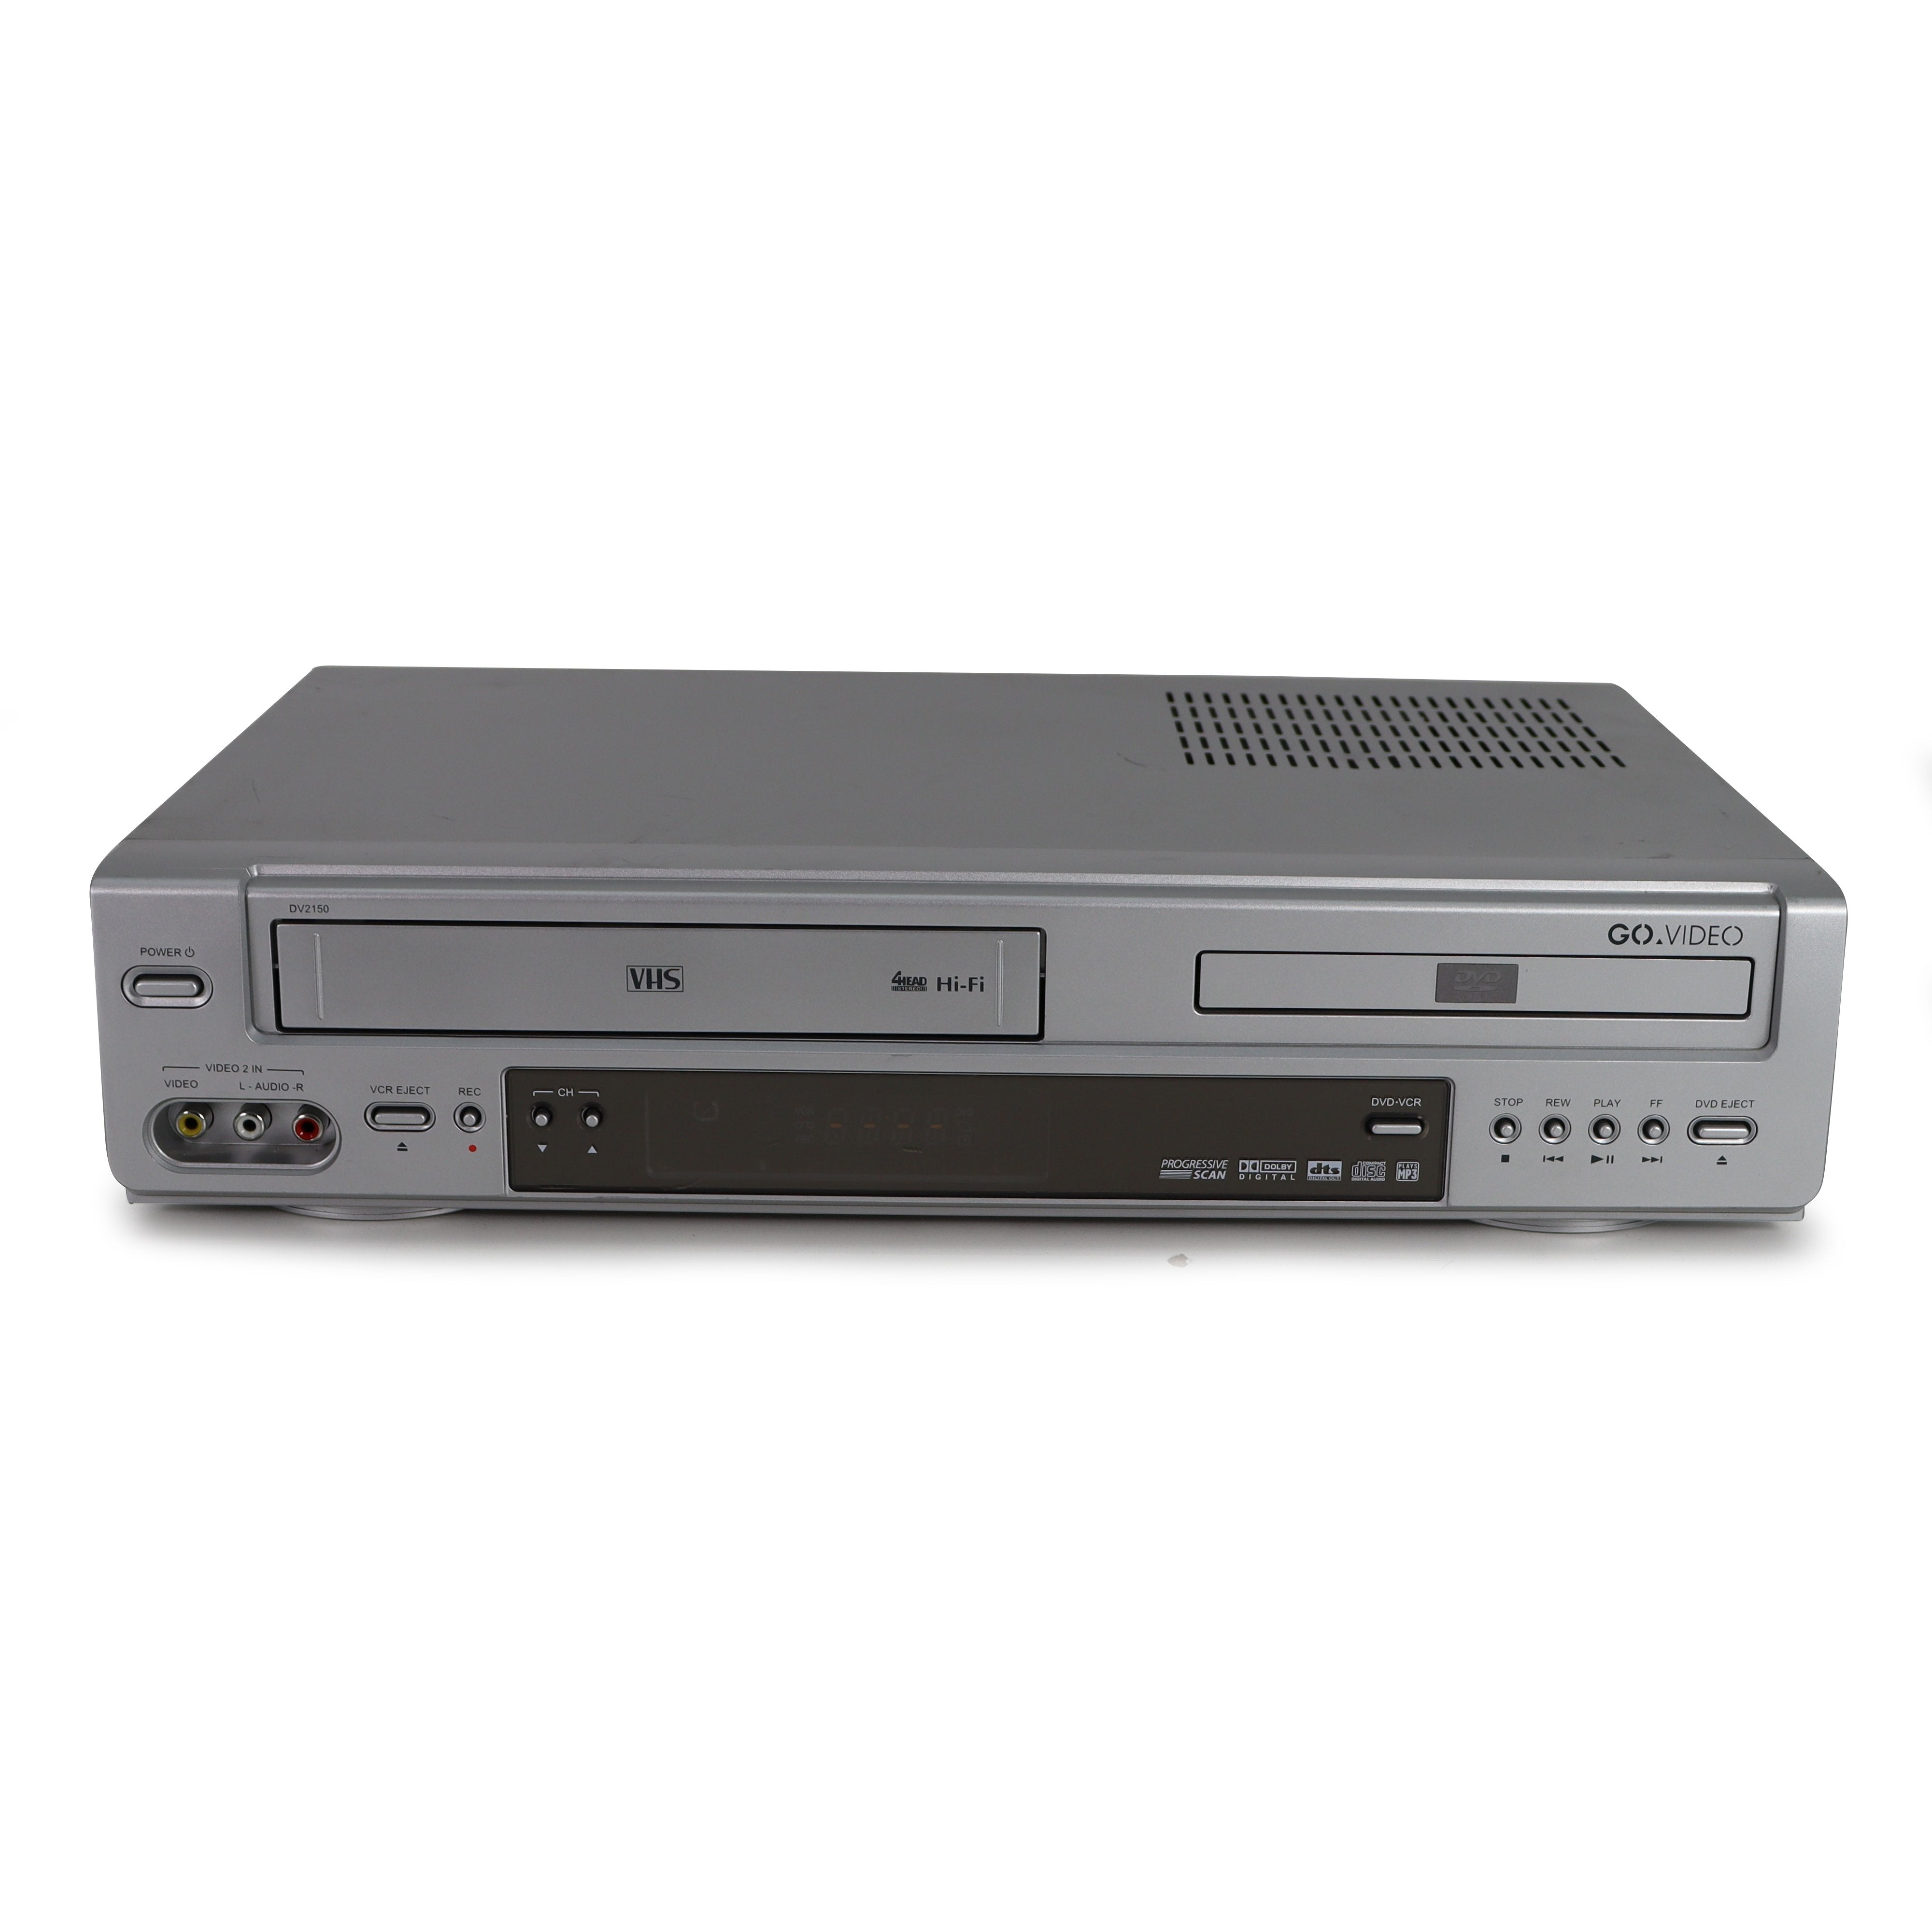 Go Video DV1030 DVD VCR Combo DVD Player Vhs Player Combo (New